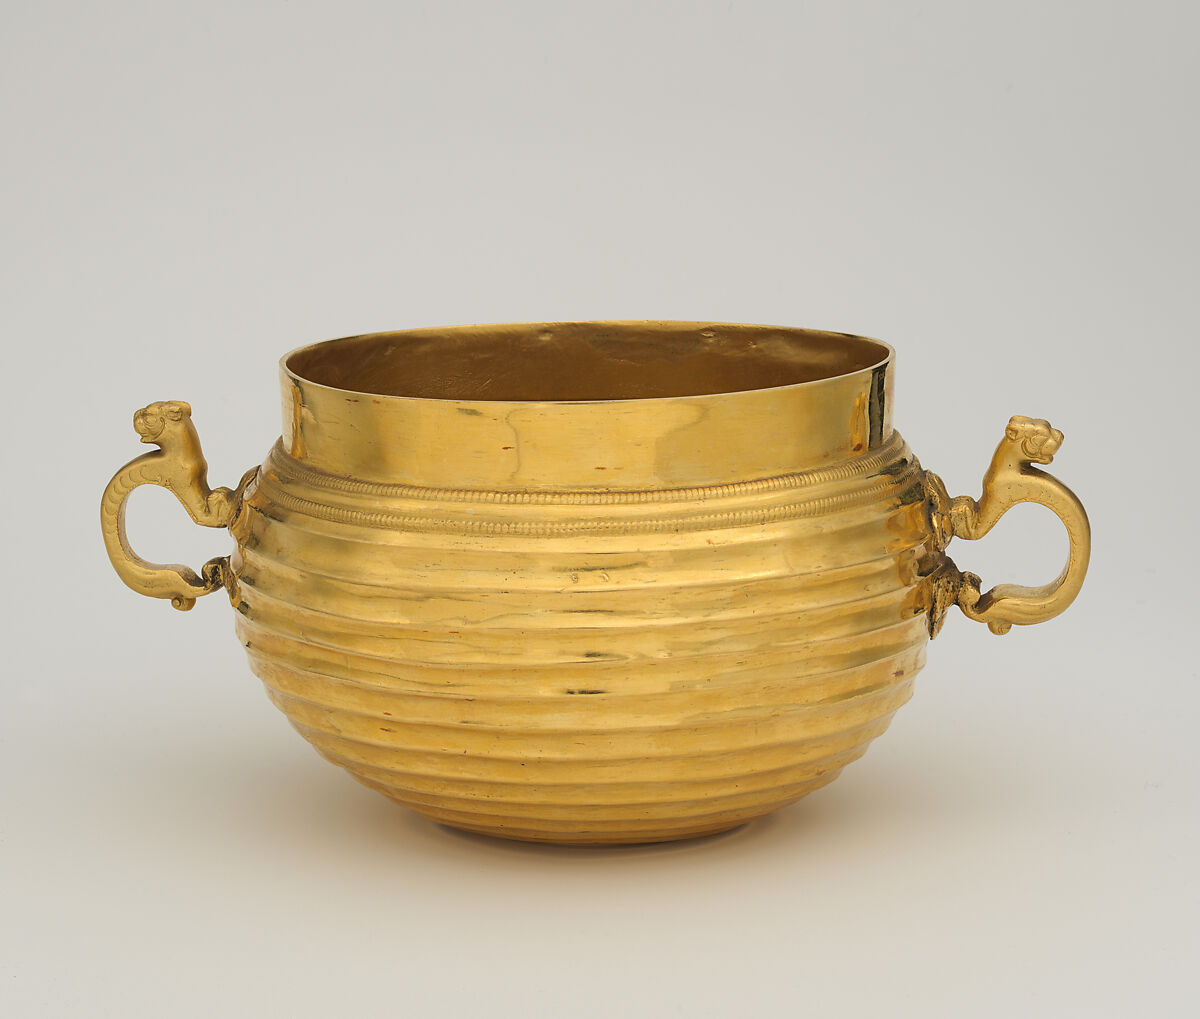 Reproduction of a Scythian bowl with animal handles, Electrotype 